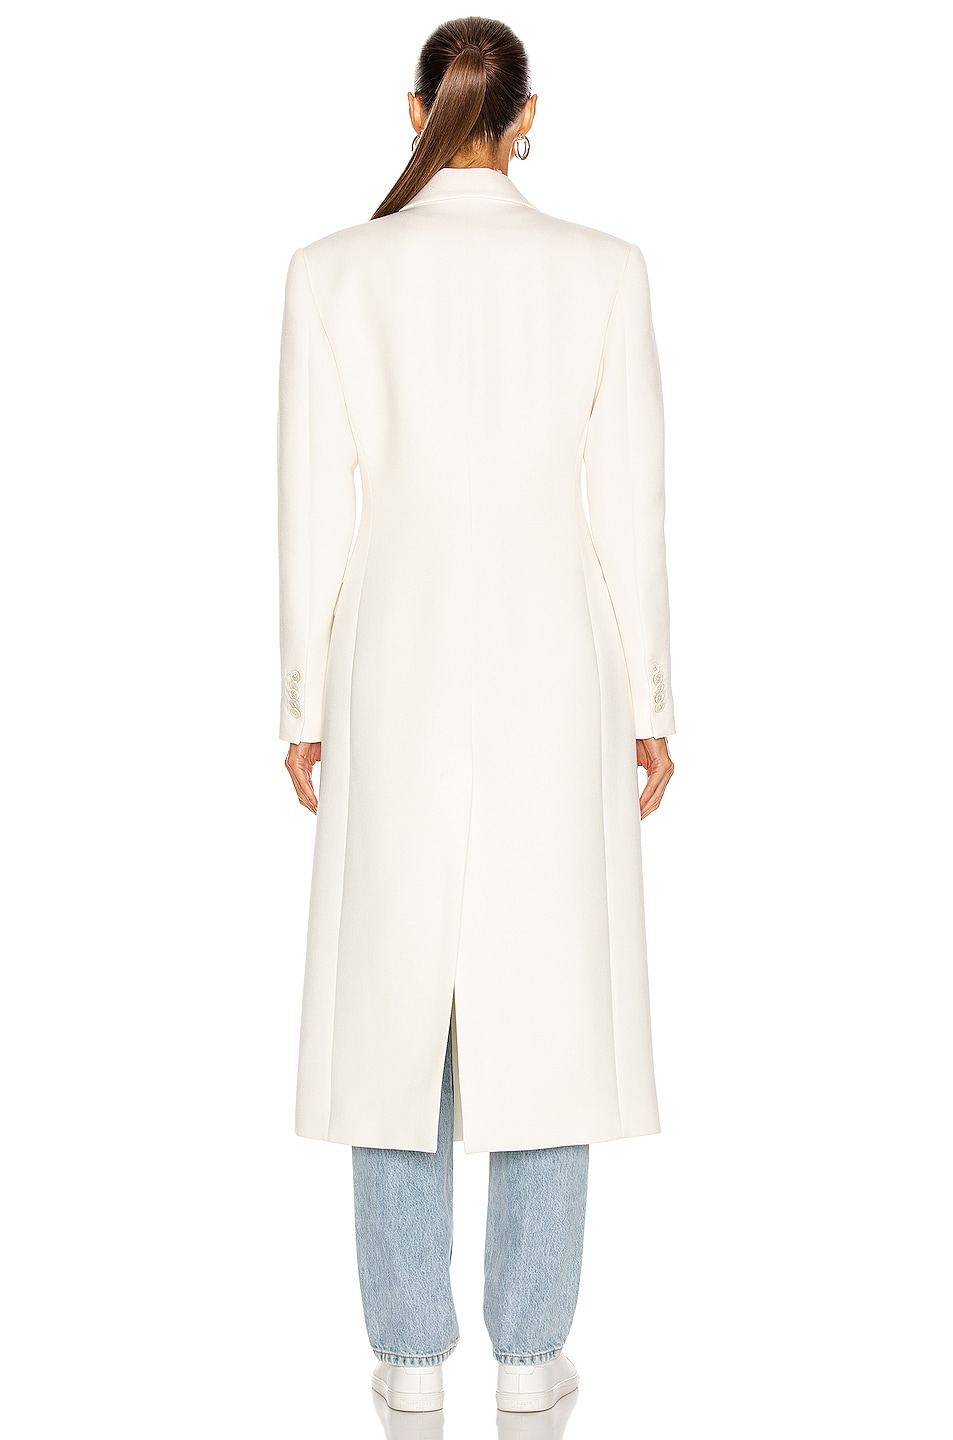 WARDROBE.NYC Double Breasted Coat in Off White | FWRD